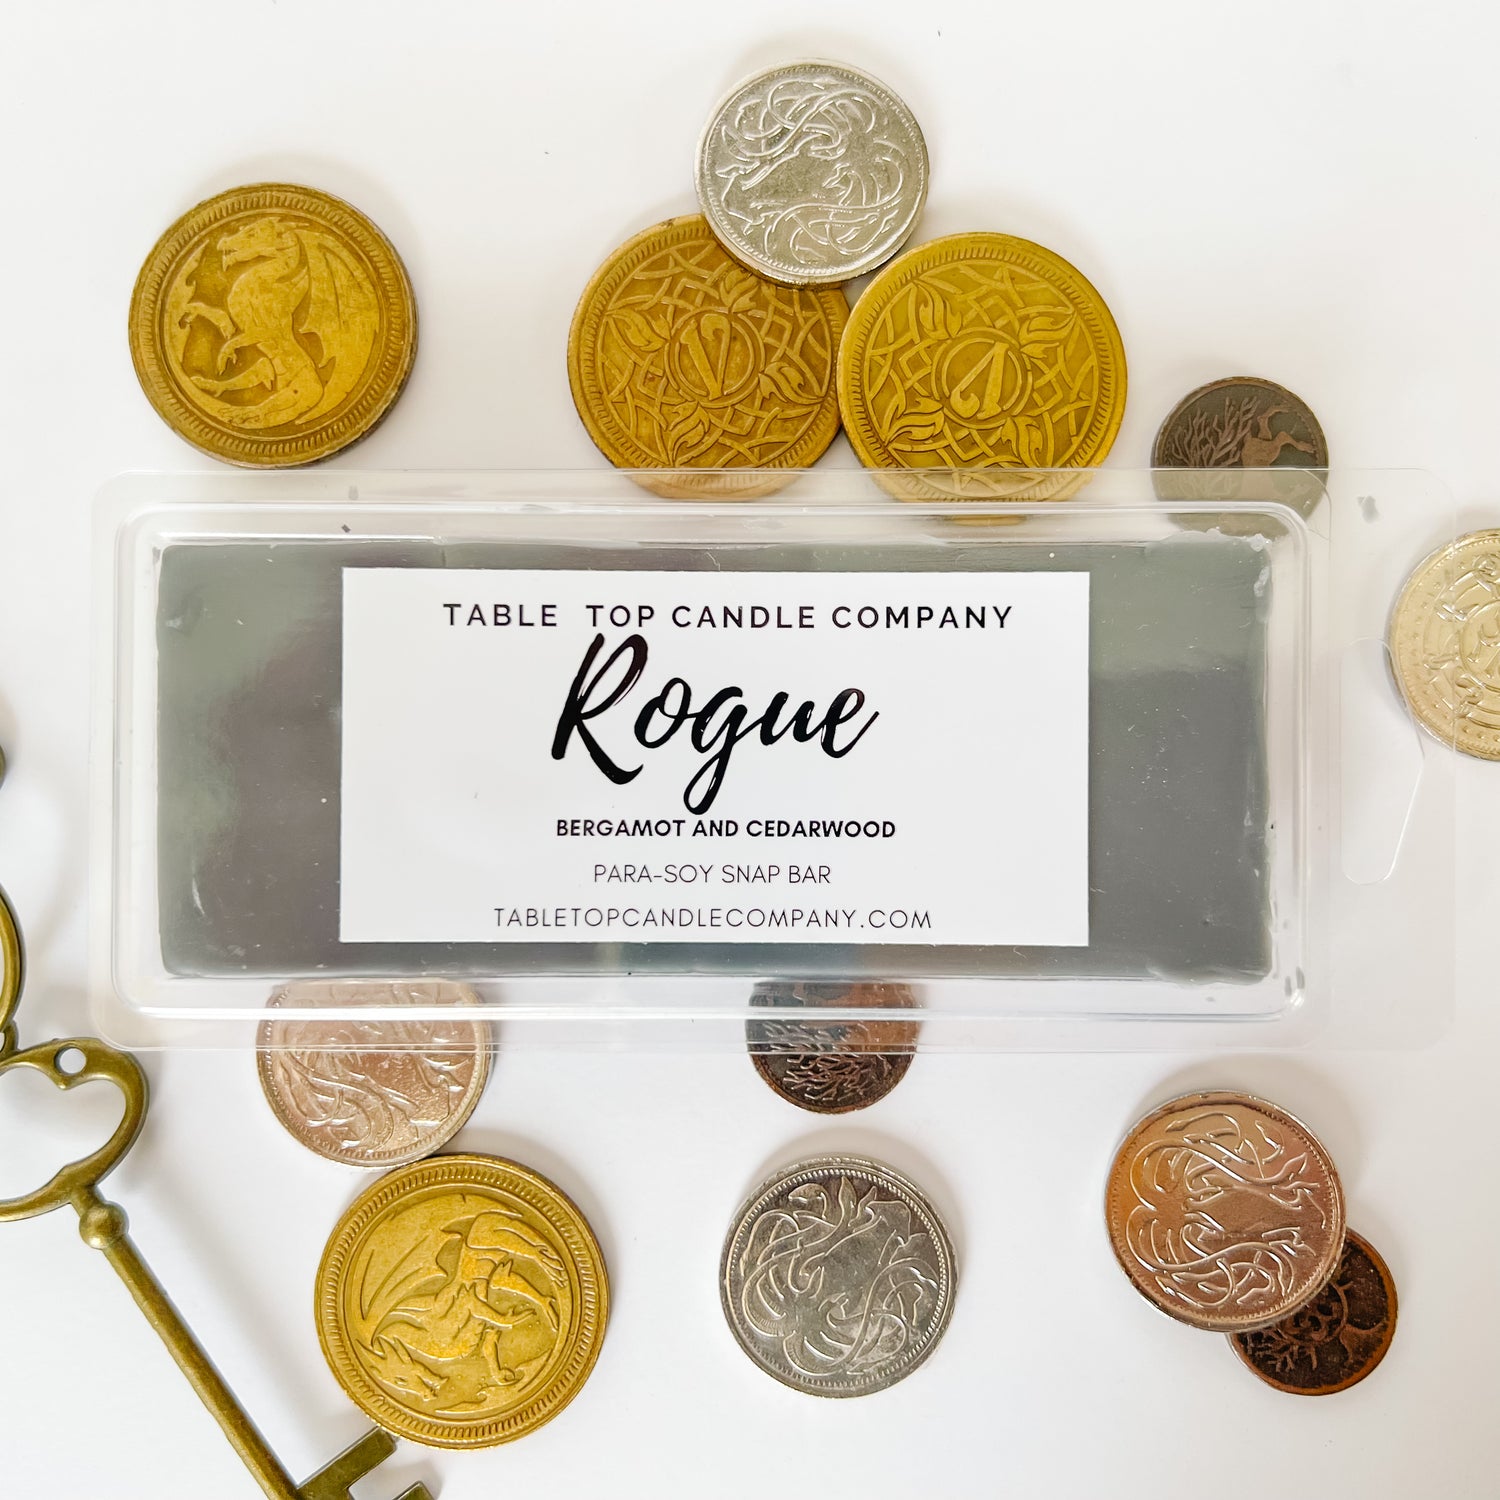 Our Rogue snap bar. It shows the wax snap bar with coins around the packaging. Snap Bars are great for those who want to use wax melters